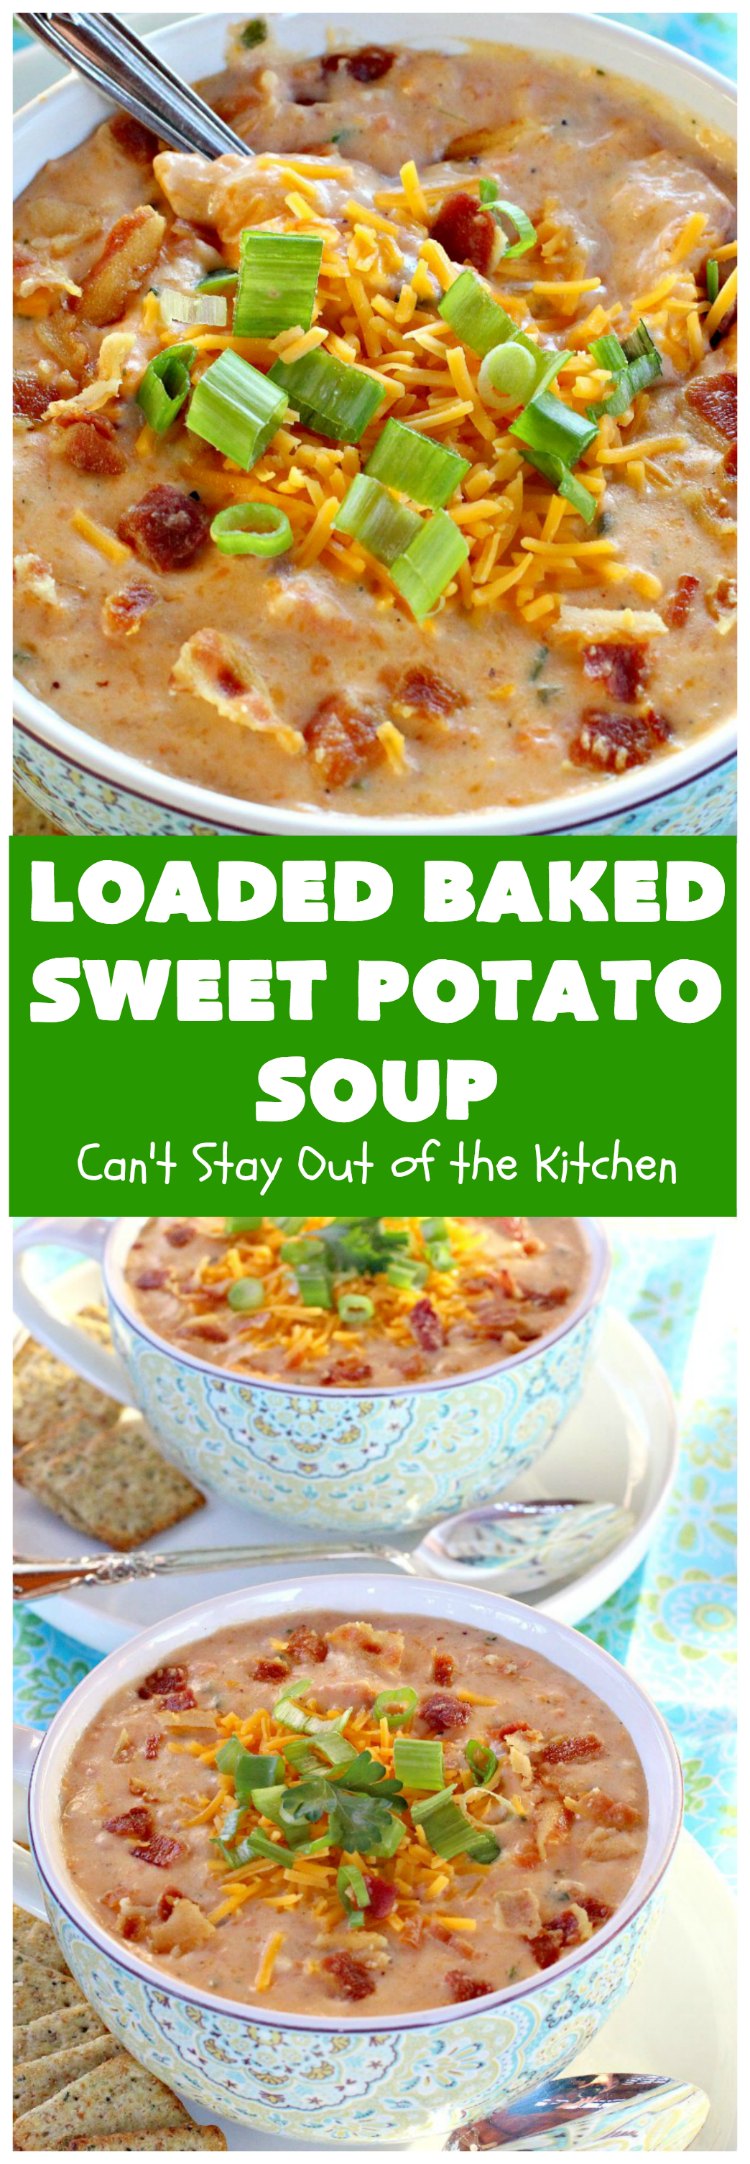 Loaded Baked Sweet Potato Soup | Can't Stay Out of the Kitchen | this #soup is phenomenal! It's loaded with #bacon, #cheddarcheese & #sweetpotatoes. Terrific comfort food for cool, fall or winter nights. We loved it! #glutenfree